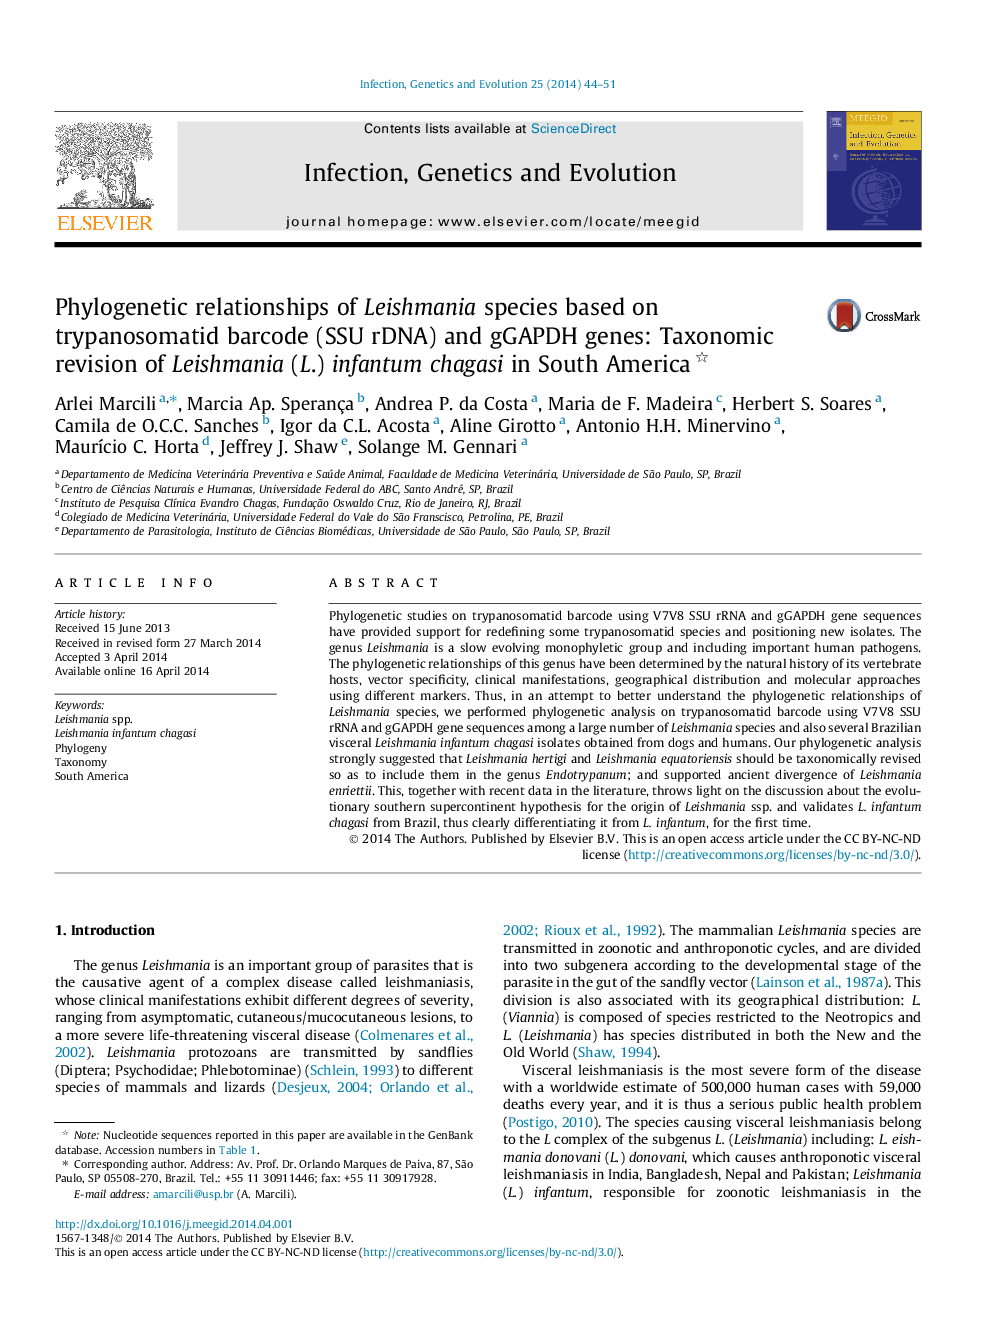 Phylogenetic relationships of Leishmania species based on trypanosomatid barcode (SSU rDNA) and gGAPDH genes: Taxonomic revision of Leishmania (L.) infantum chagasi in South America